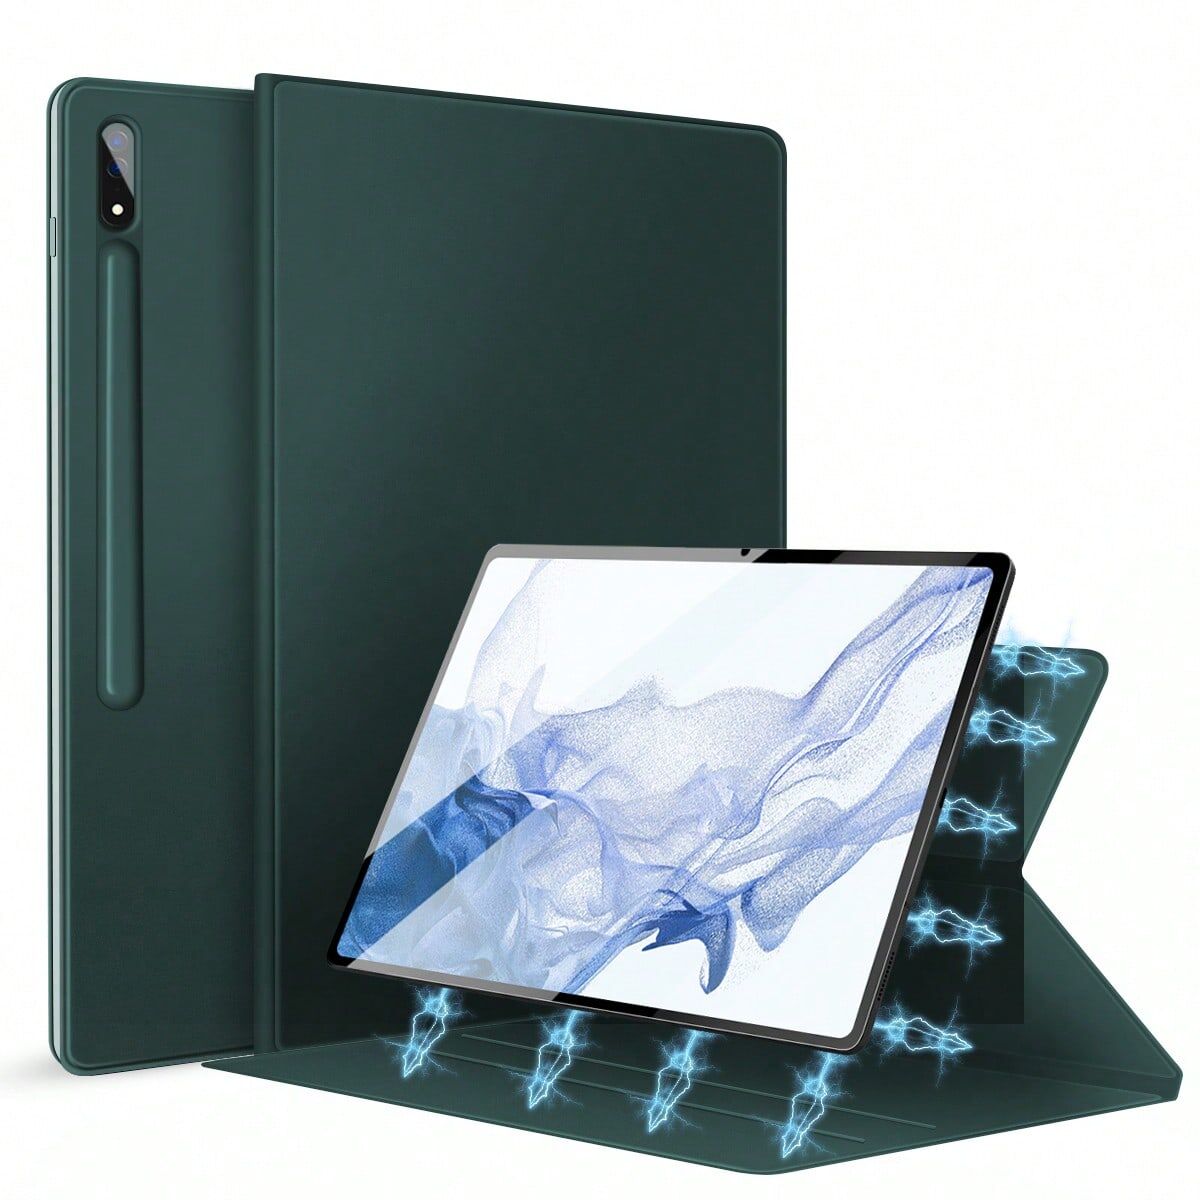 SHEIN Magnetic Tablet Case For Samsung Galaxy Tab S7 S8 S7 FE S7 Plus S8 Plus Funda With Built-in Pencil Holder Army Green Samsung Galaxy Tab S8 11 Inch,Samsung Galaxy Tab S8+ 12.4 Inch,Samsung Galaxy Tab S7 11 Inch,Samsung Galaxy Tab S7 FE 12.4 Inch